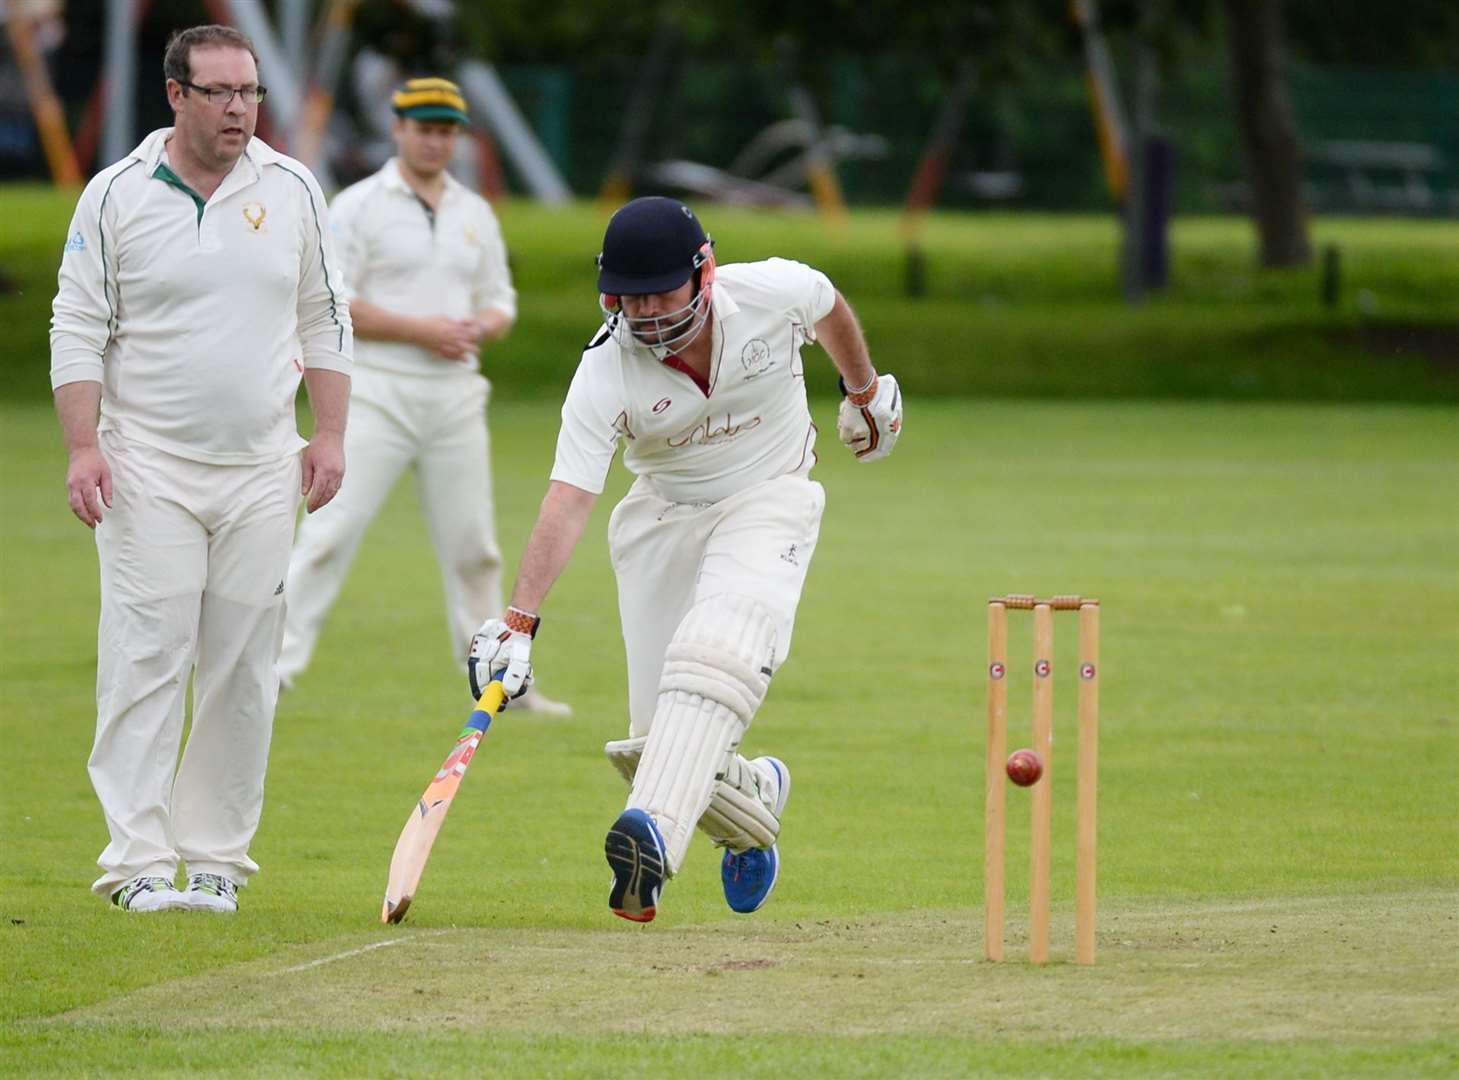 Euan Smith helped Highland over the line against Forres with a knock of 46 not out. Picture: Gary Anthony. Image No.044421